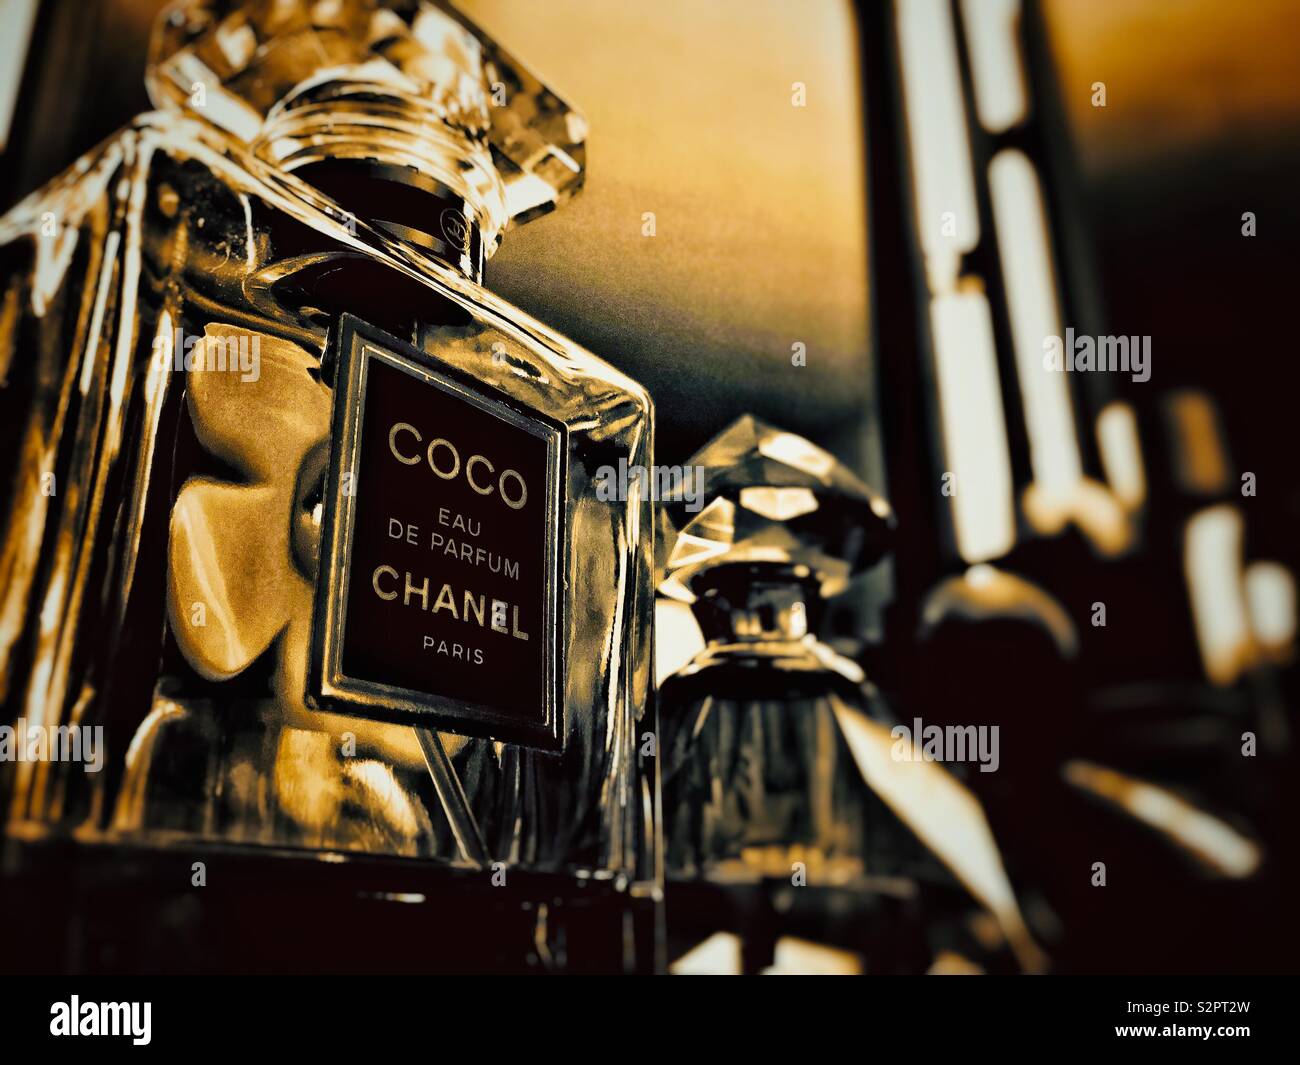 Meeting with Royalty – Chanel N° 5 Parfum